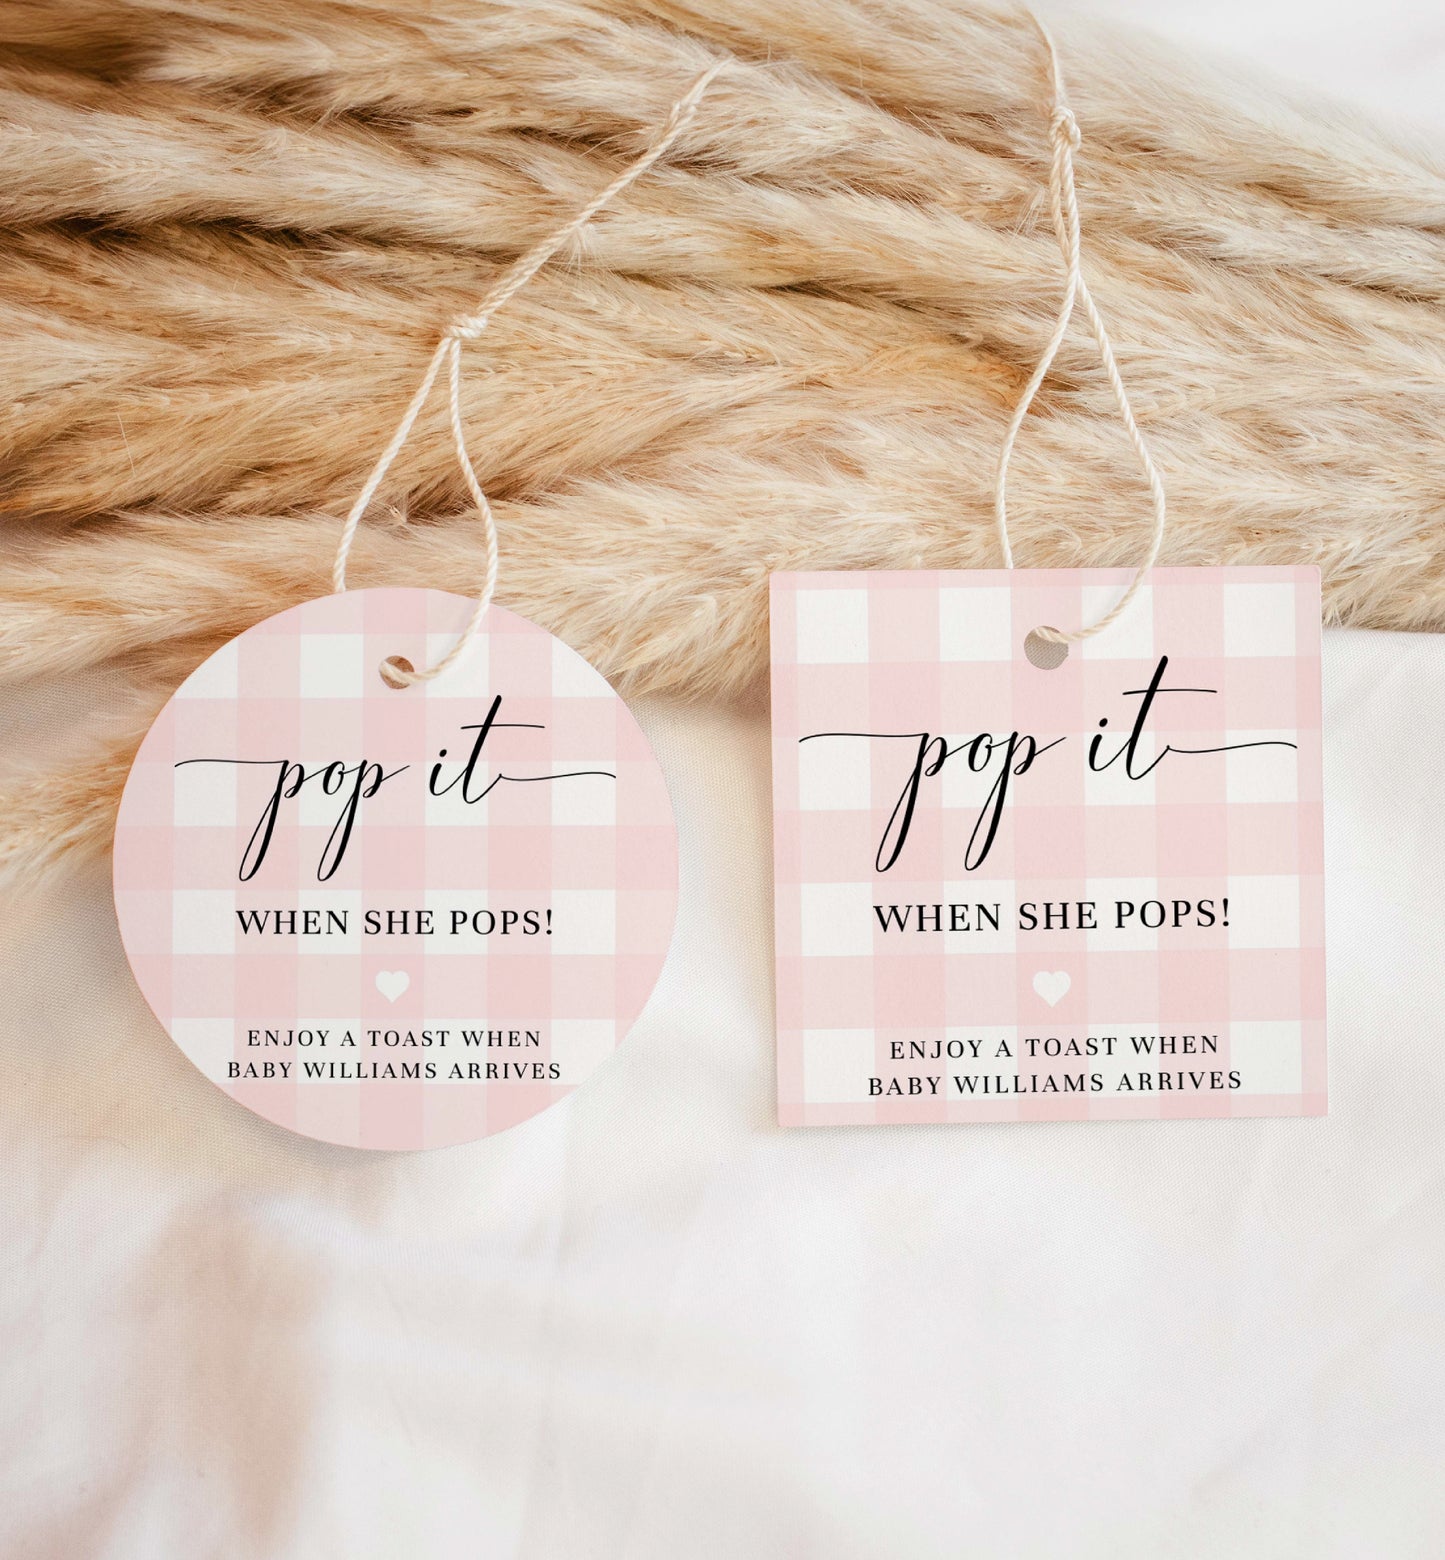 Pop It When She Pops Favor Tag and Label, Printable Pink Girl Baby Shower Champagne Pop It Favor Tag, Pink Gingham Mini Wine Bottle Label